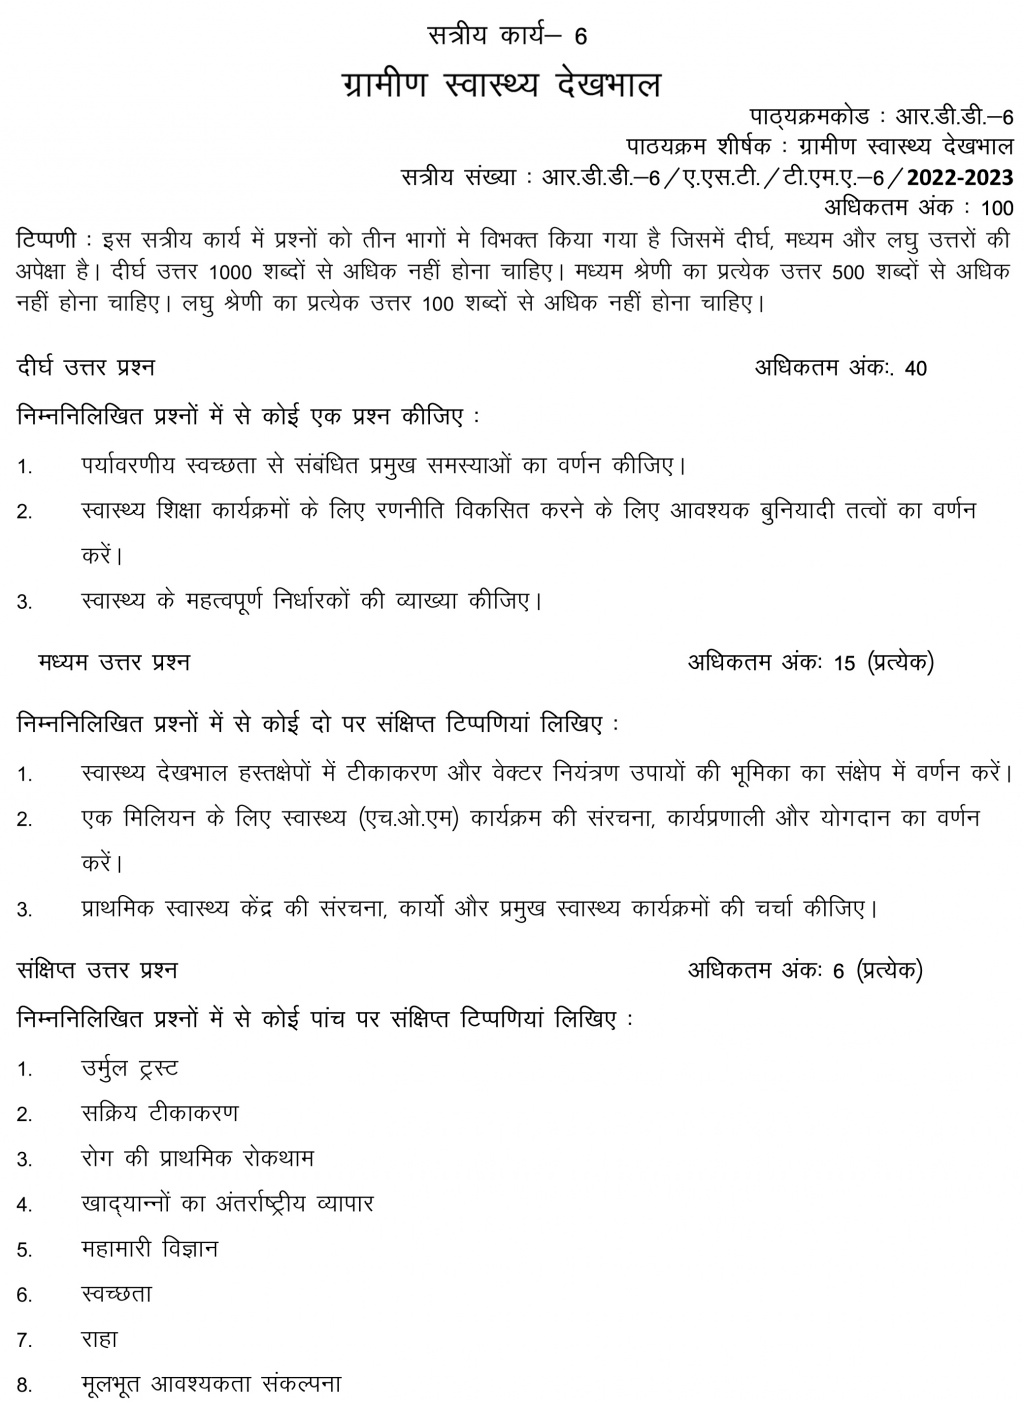 IGNOU RDD-06 - Rural Health Care Latest Solved Assignment-July 2022 – January 2023